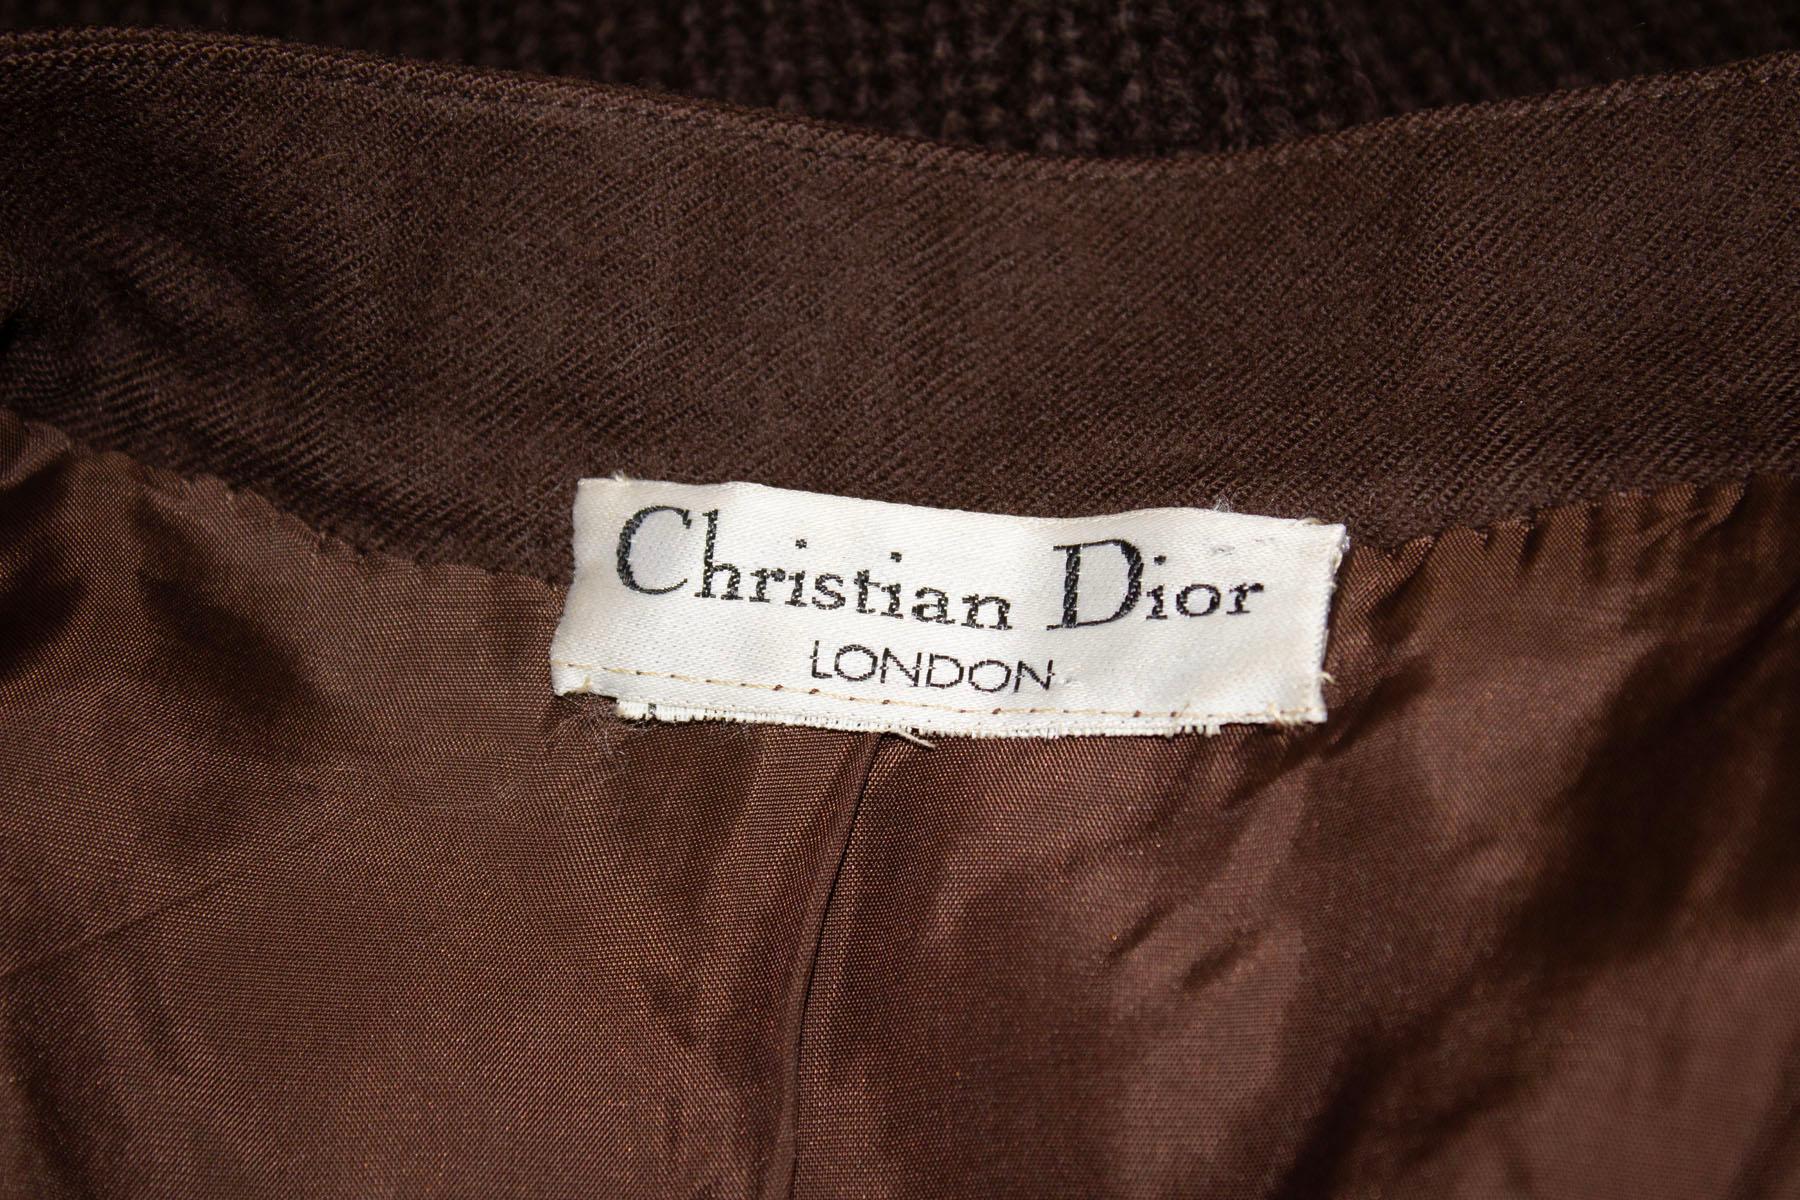 A great skirt and jacket combination from Christian Dior , London. The jacket has a button front opening, with knitted front, back and cuffs. The remainder of the jacket is wool. The skirt is in wool, fully lined with two pockets. 
Measurements: